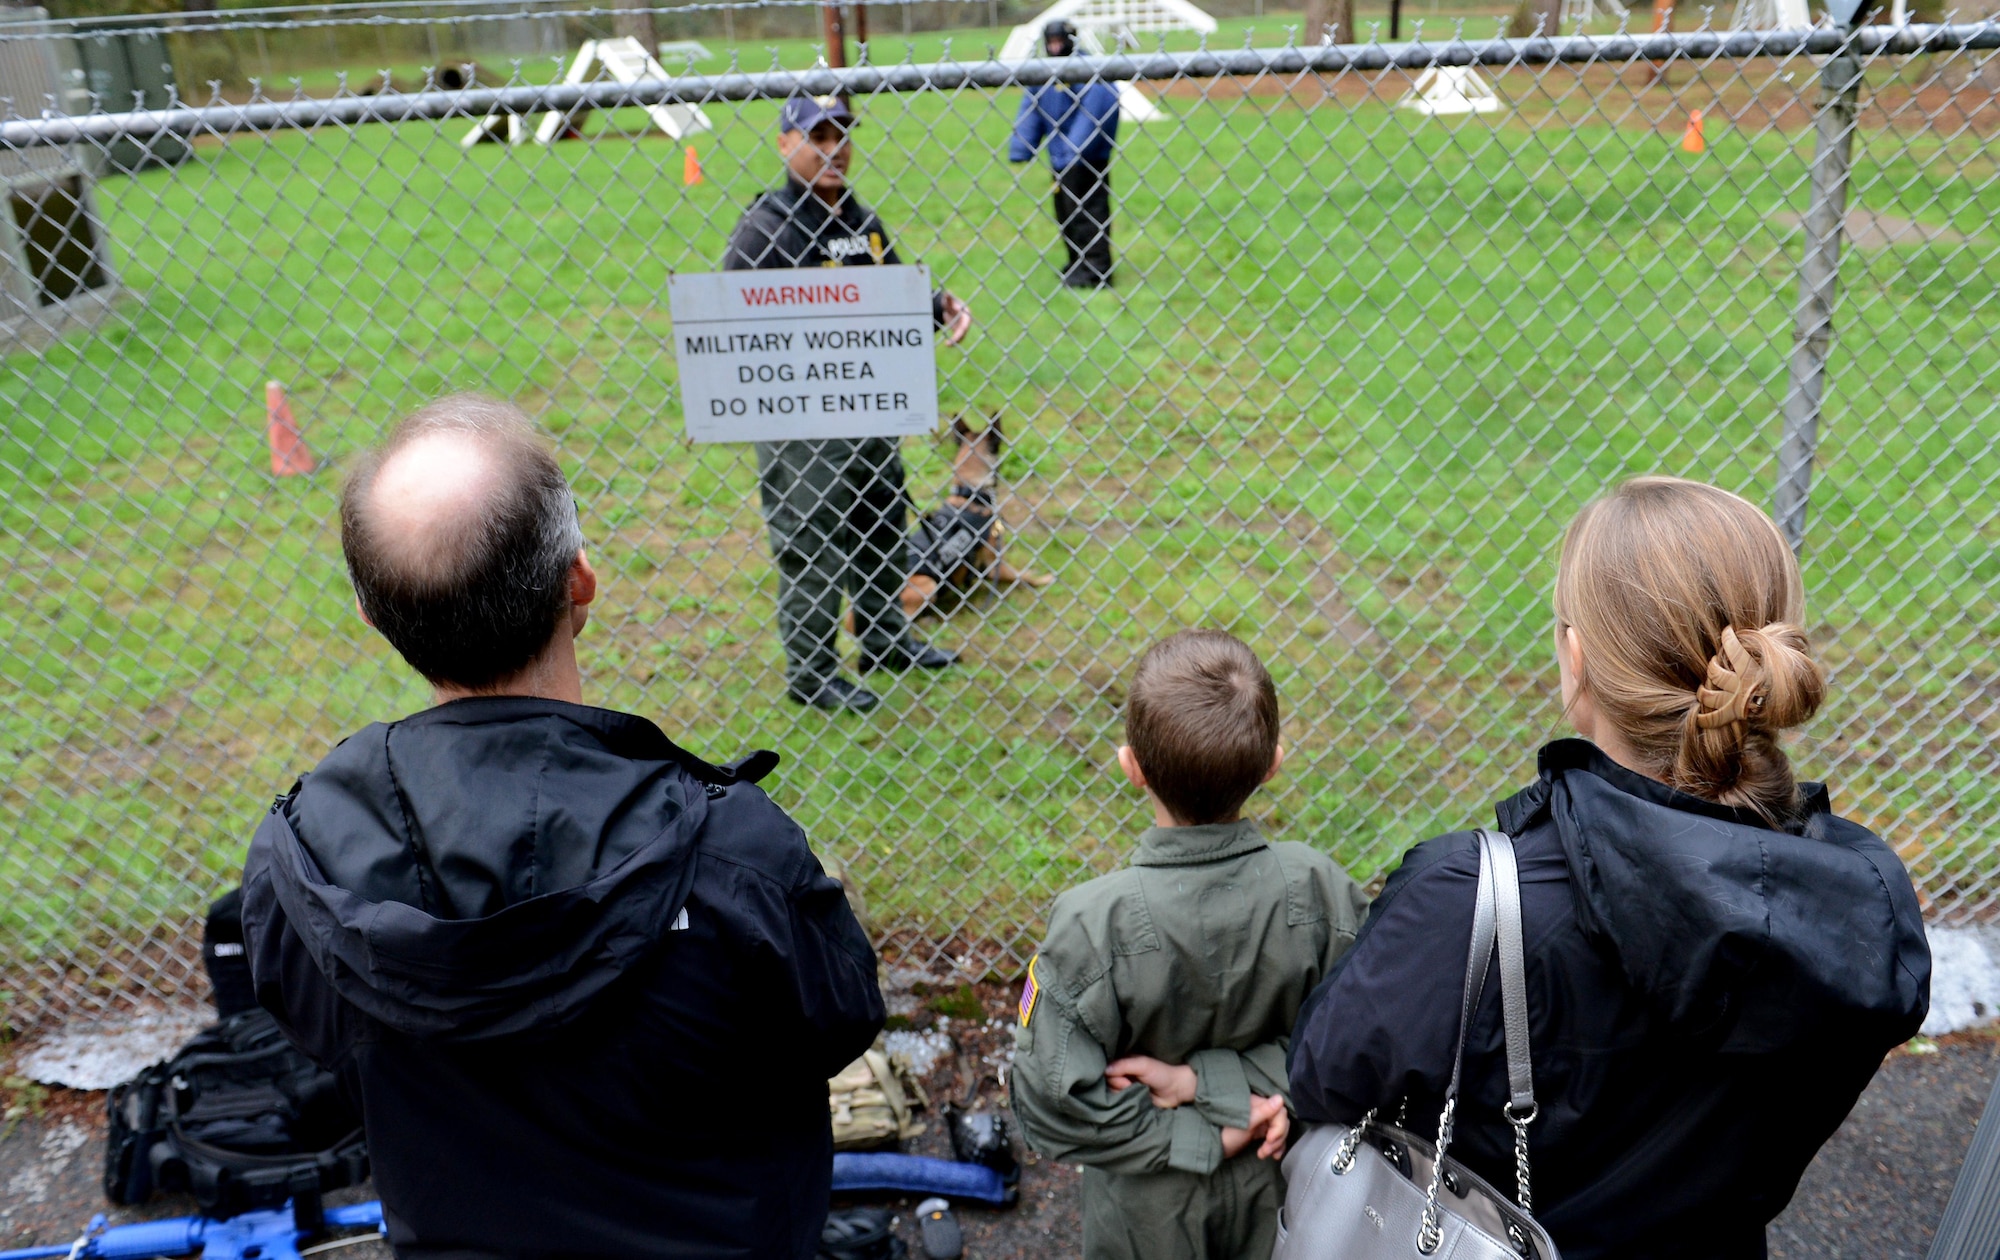 Ben Lambertson (middle) and his parents Paul (left) and Michelle (right), watch a Military Working Dog demo during his Pilot for a Day visit Oct. 7, 2016 at Joint Base Lewis-McChord, Wash. While at the MWD demo, Ben and his family had a chance to interact with the canines, and observe working dogs doing some obedience training and bite work. (U.S. Air Force photo/Senior Airman Divine Cox)